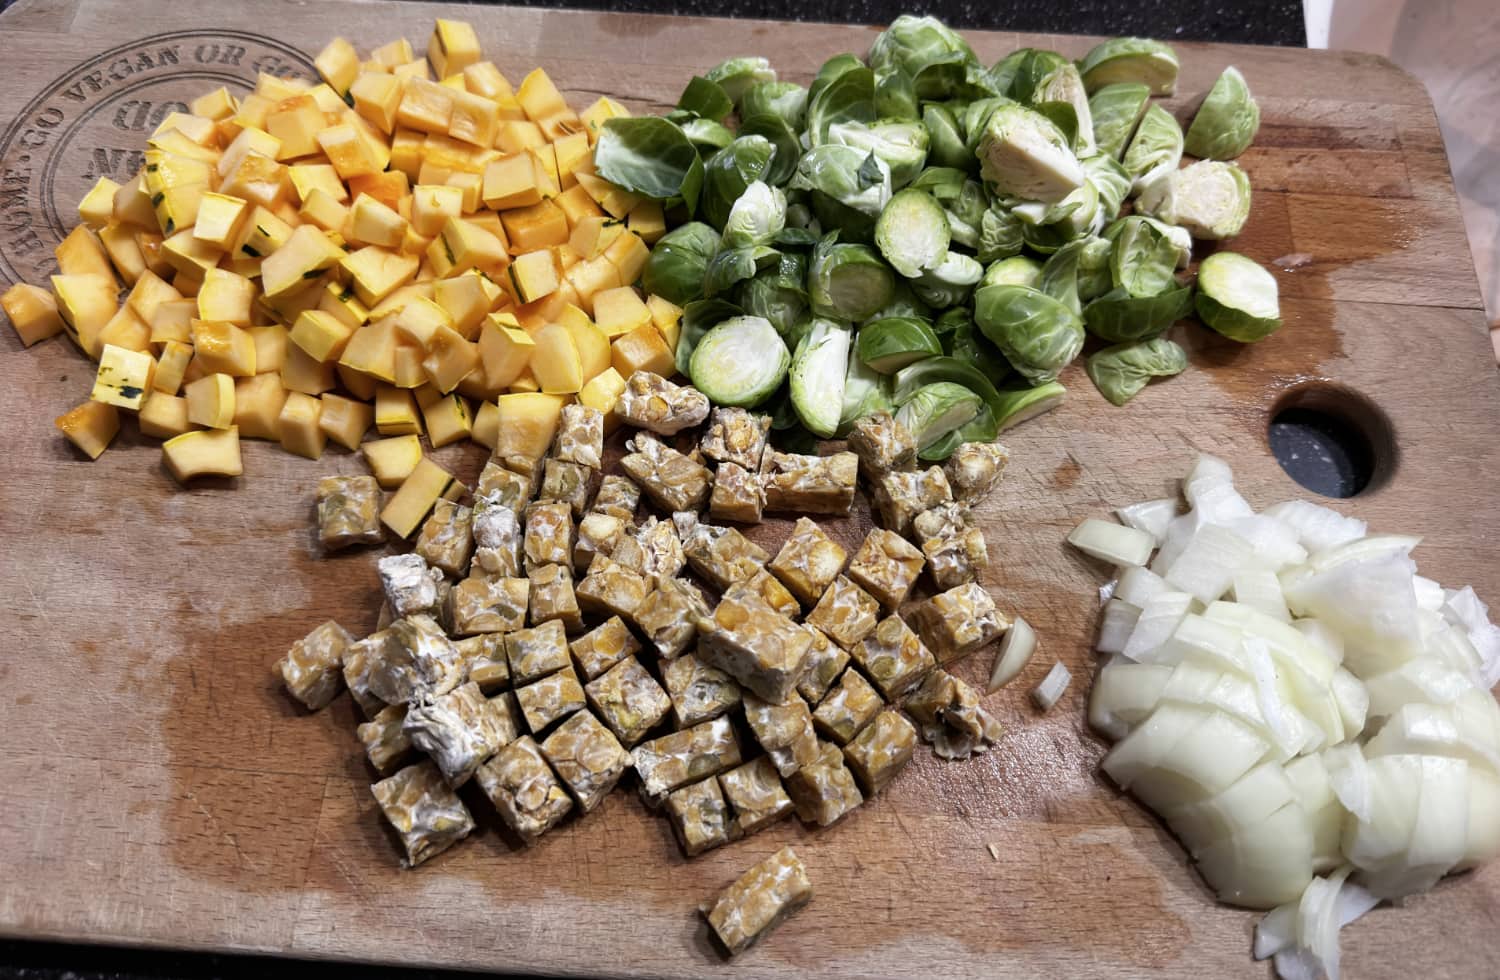 prepped delicata squash, brussels sprouts, tempeh and onions on a wood cutting board.